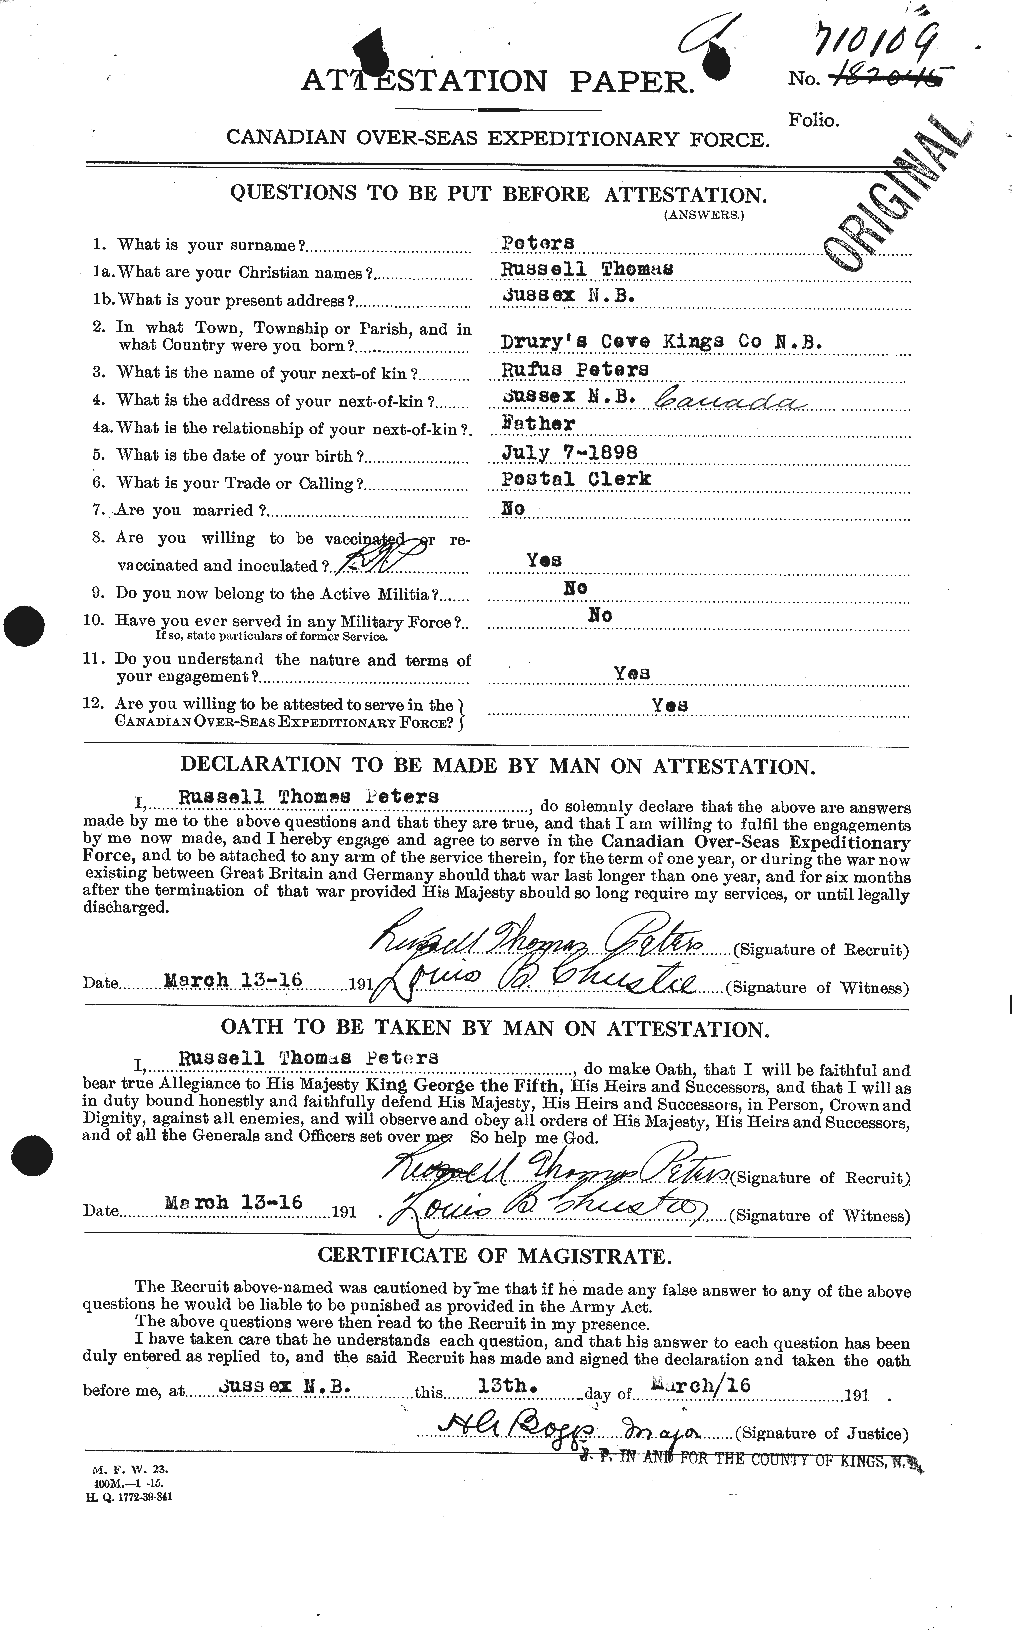 Personnel Records of the First World War - CEF 575619a